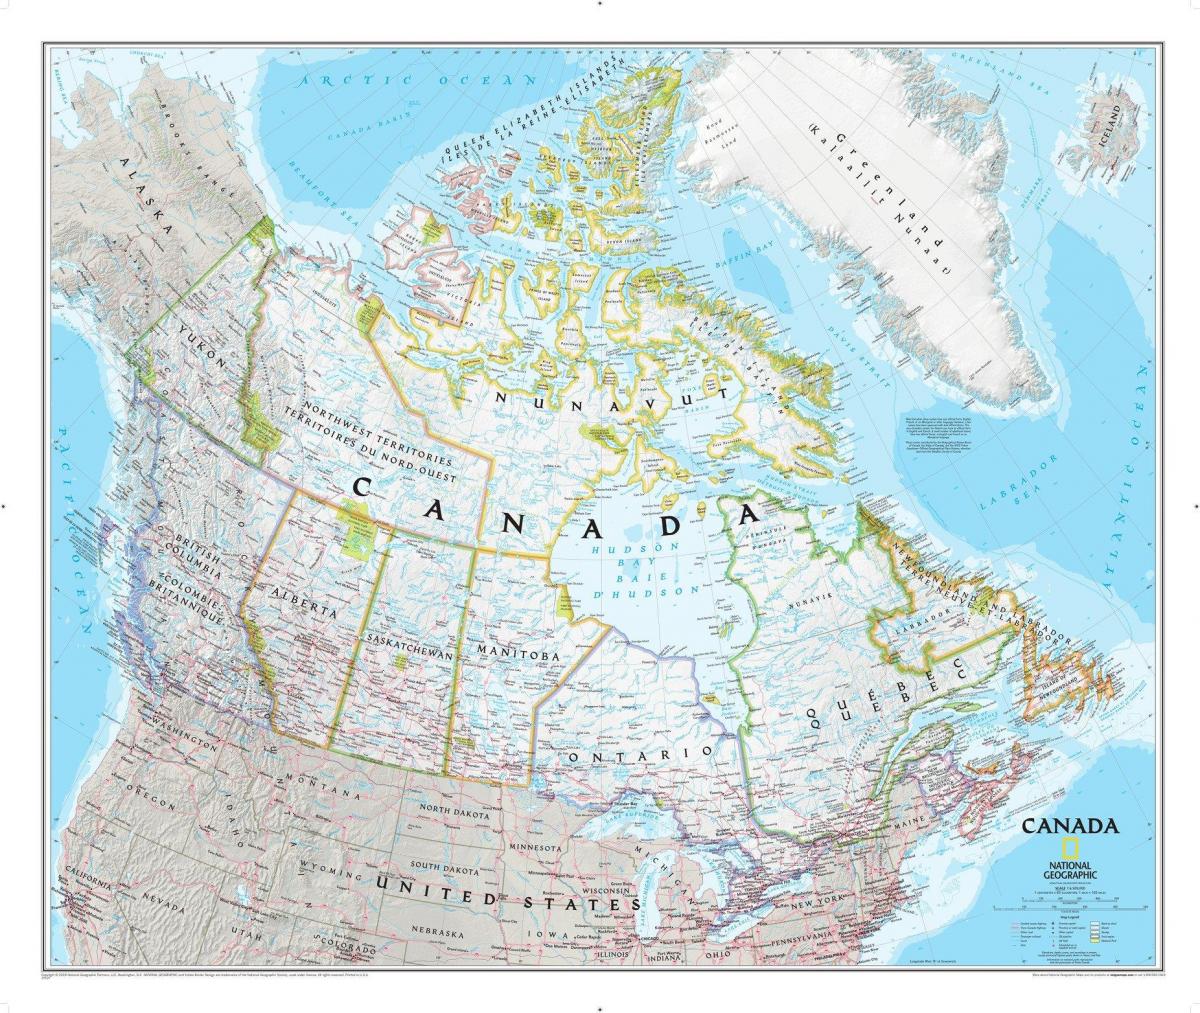 Canada areas map